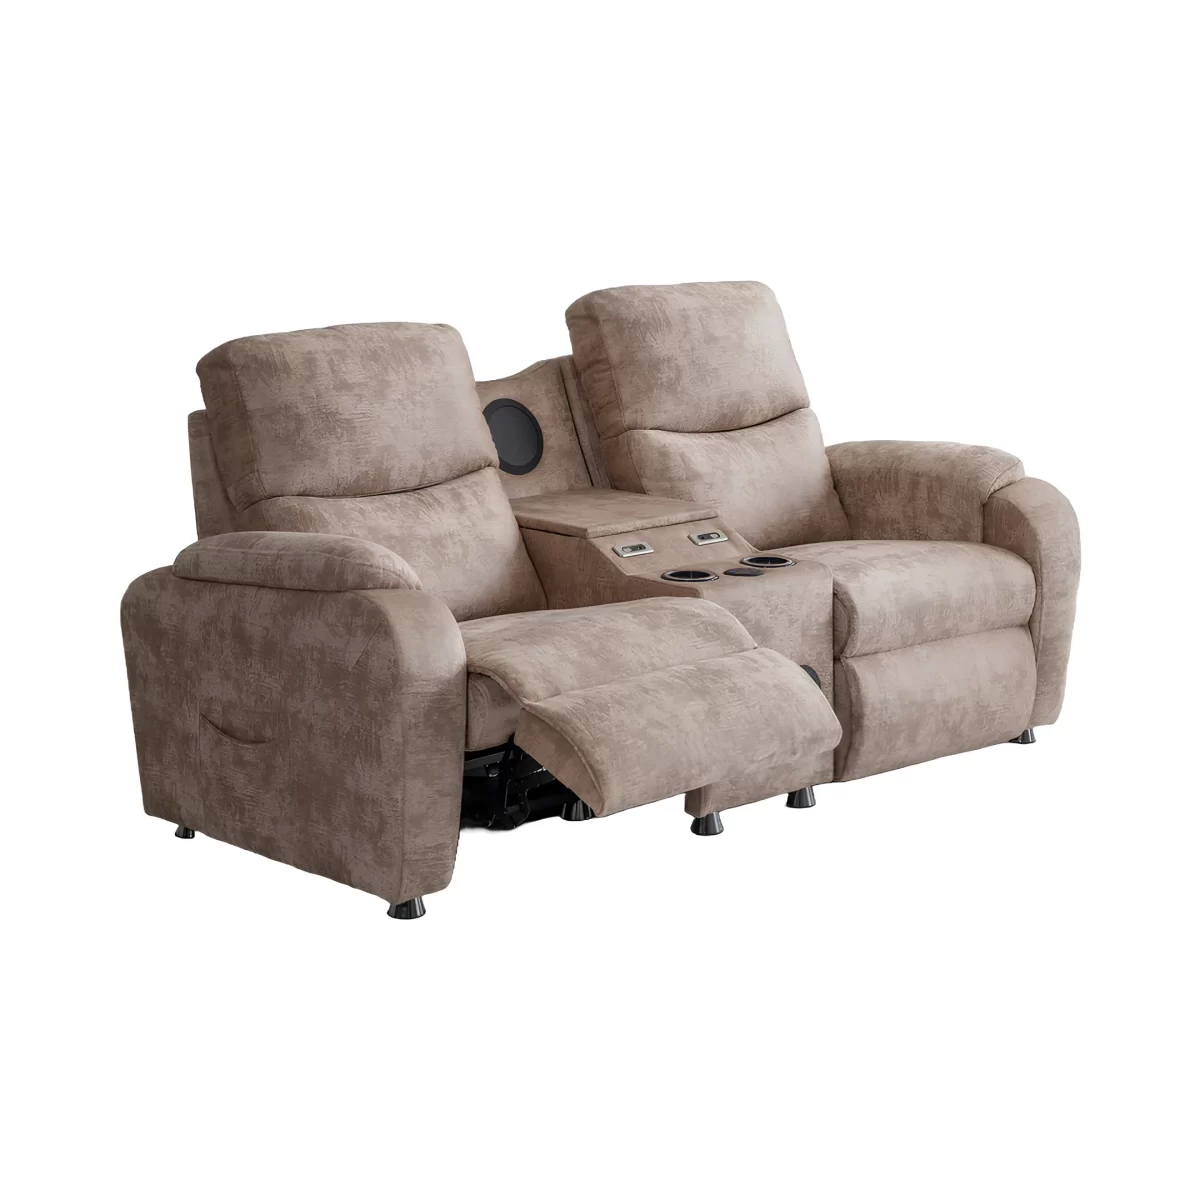 babil double reclining sofa electric recliner speakers usb ports cupholders 4 2